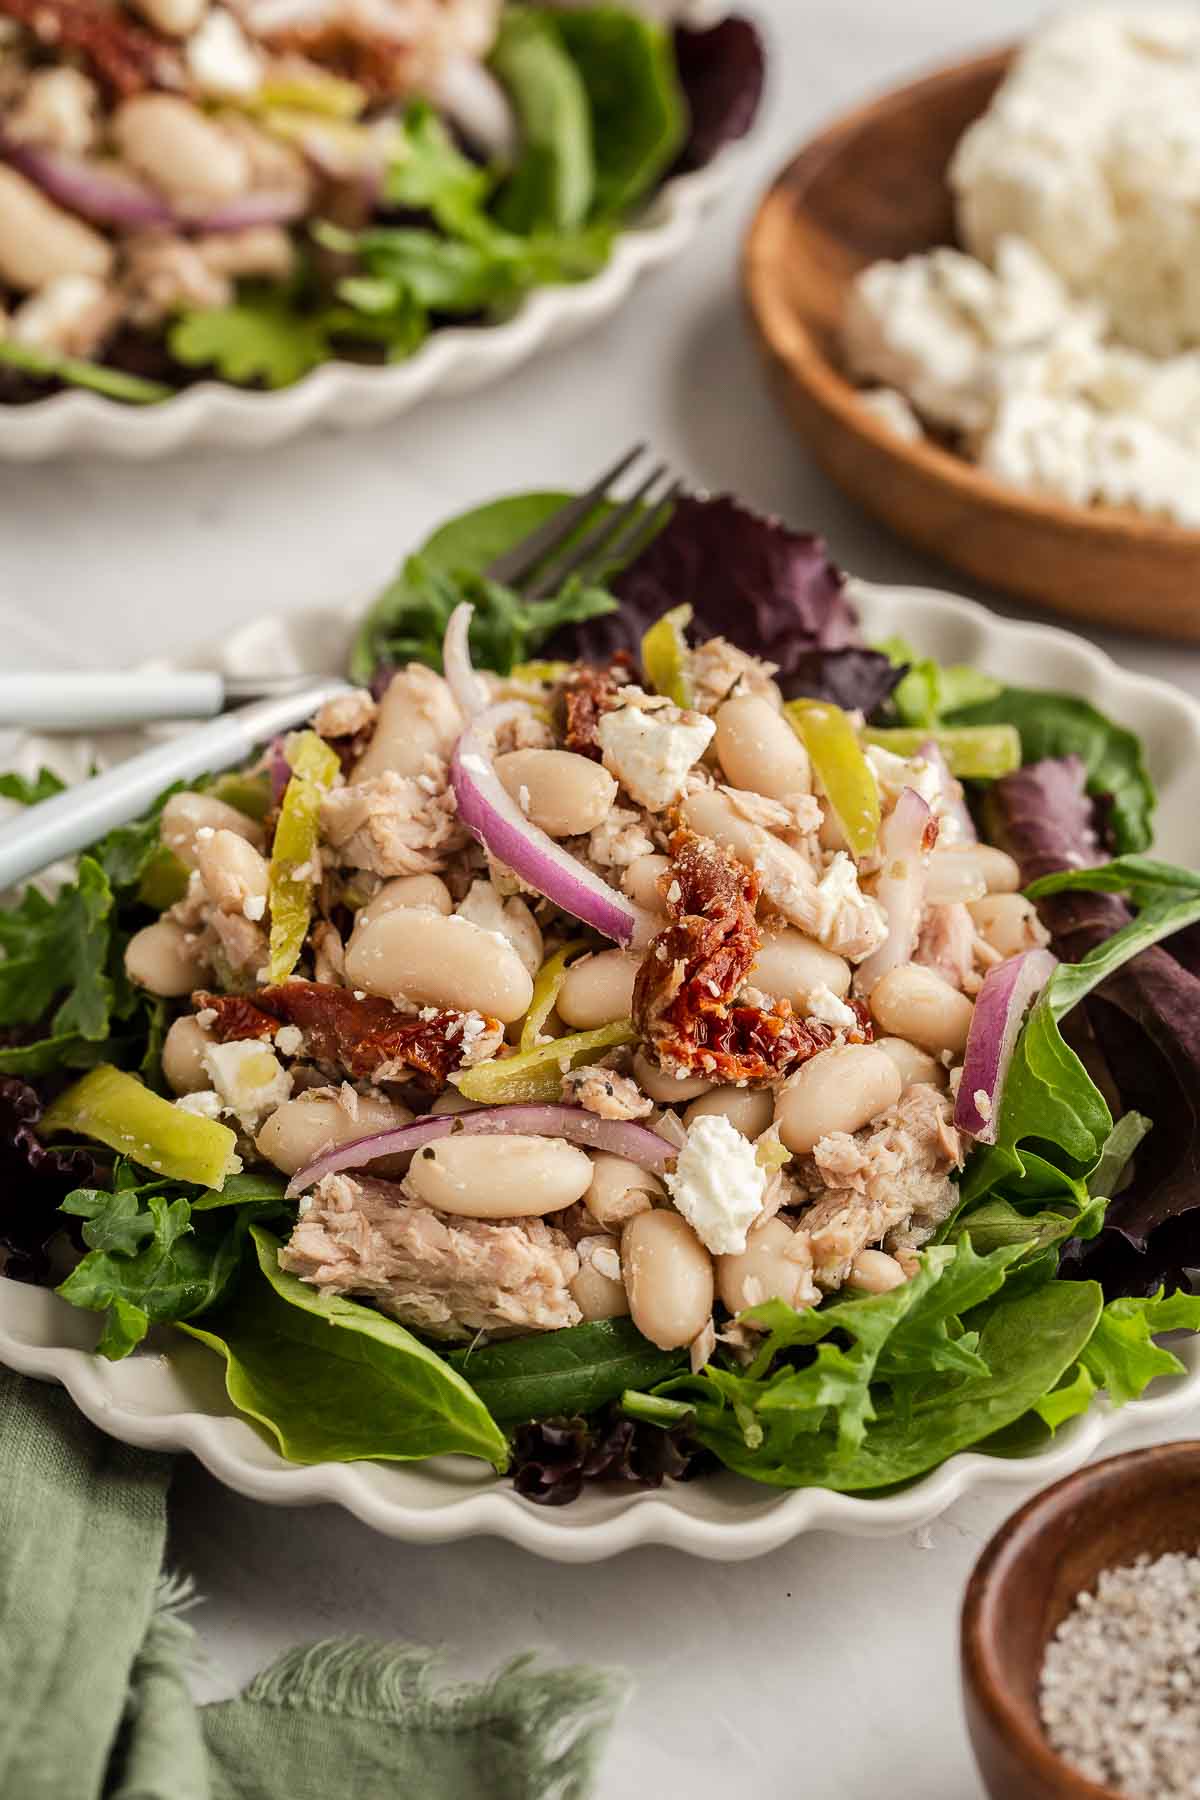 White bean tuna salad with vegetables on salad greens.